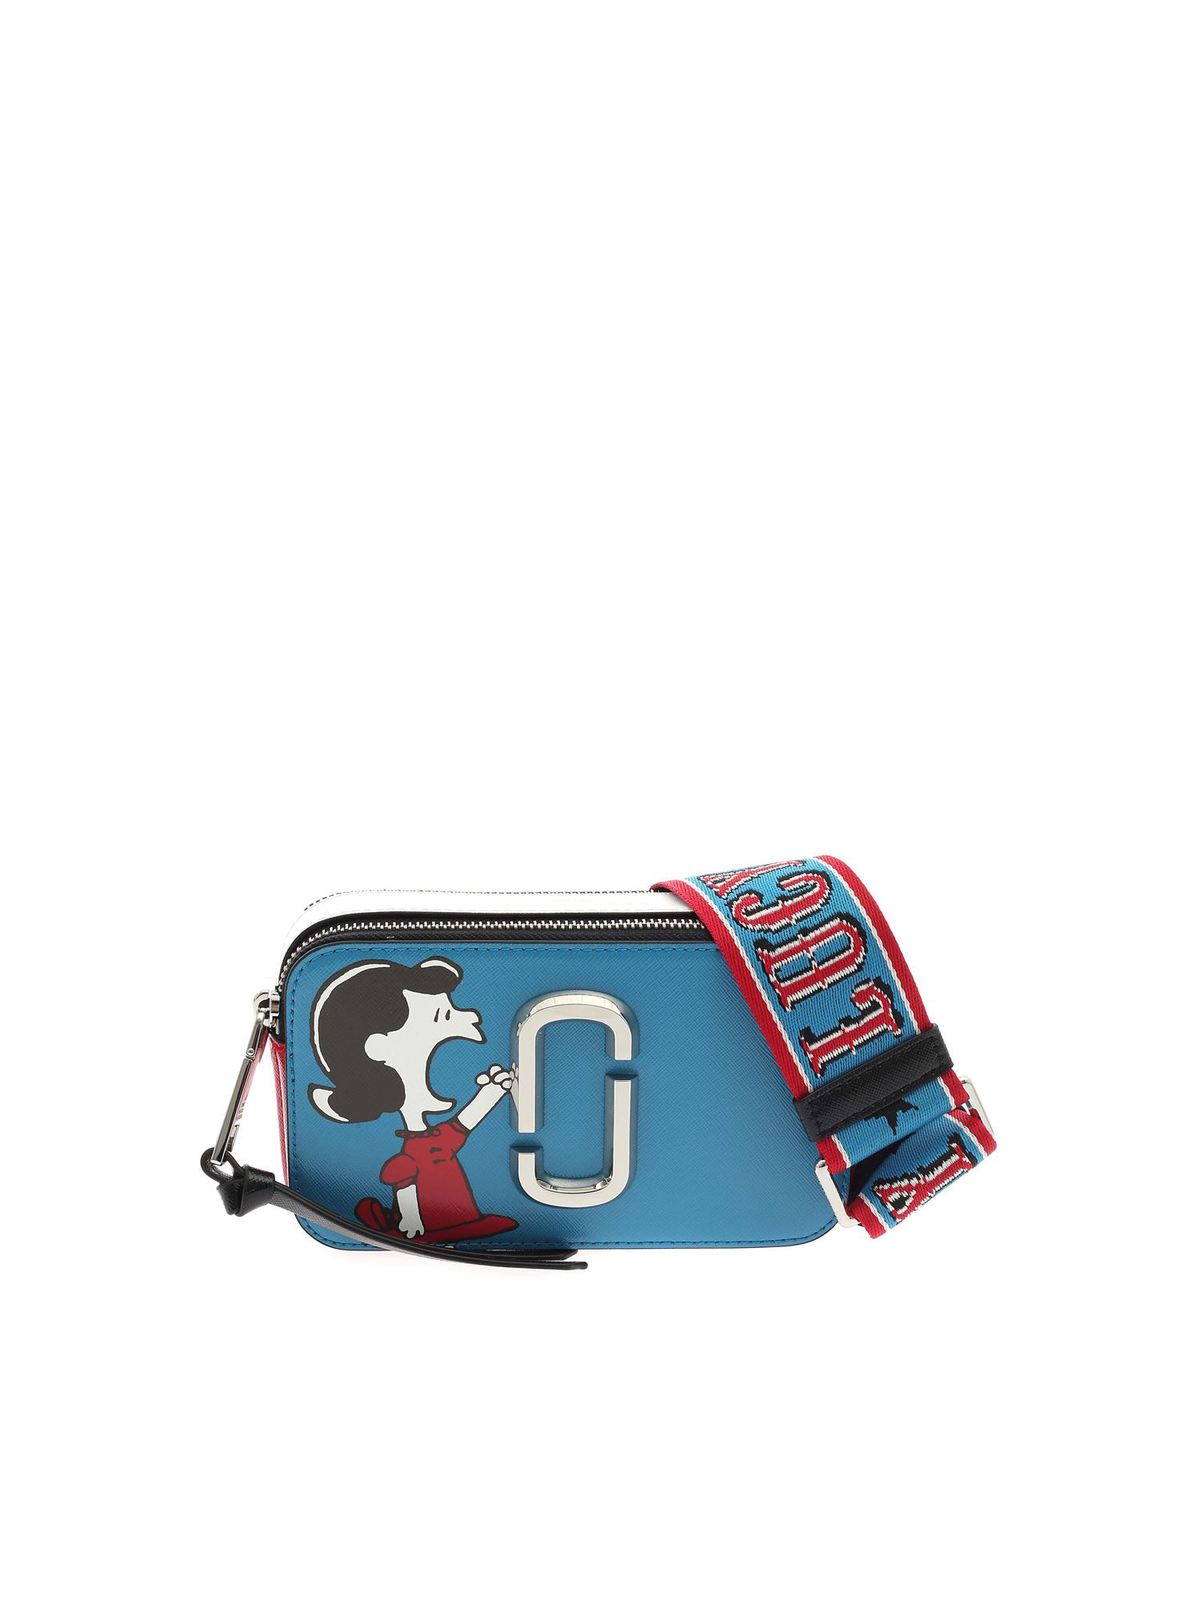 Cross body bags Marc Jacobs - Peanuts bag in blue white and red -  M0016828401